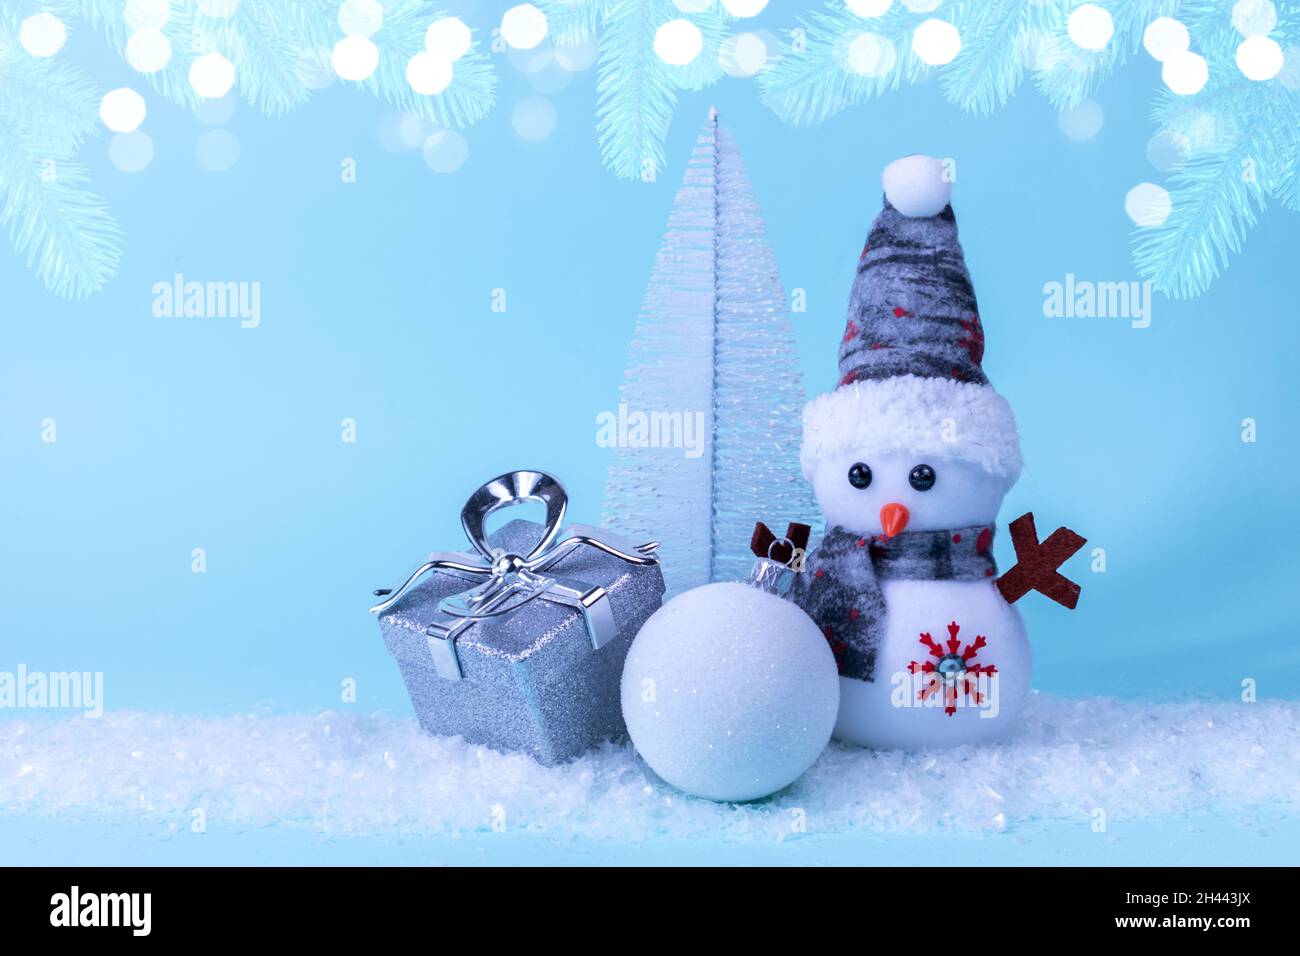 Snowman, gift, Christmas tree, Christmas ball on white snow on a blue background with Christmas tree branches and garlands. Christmas New Year card Stock Photo